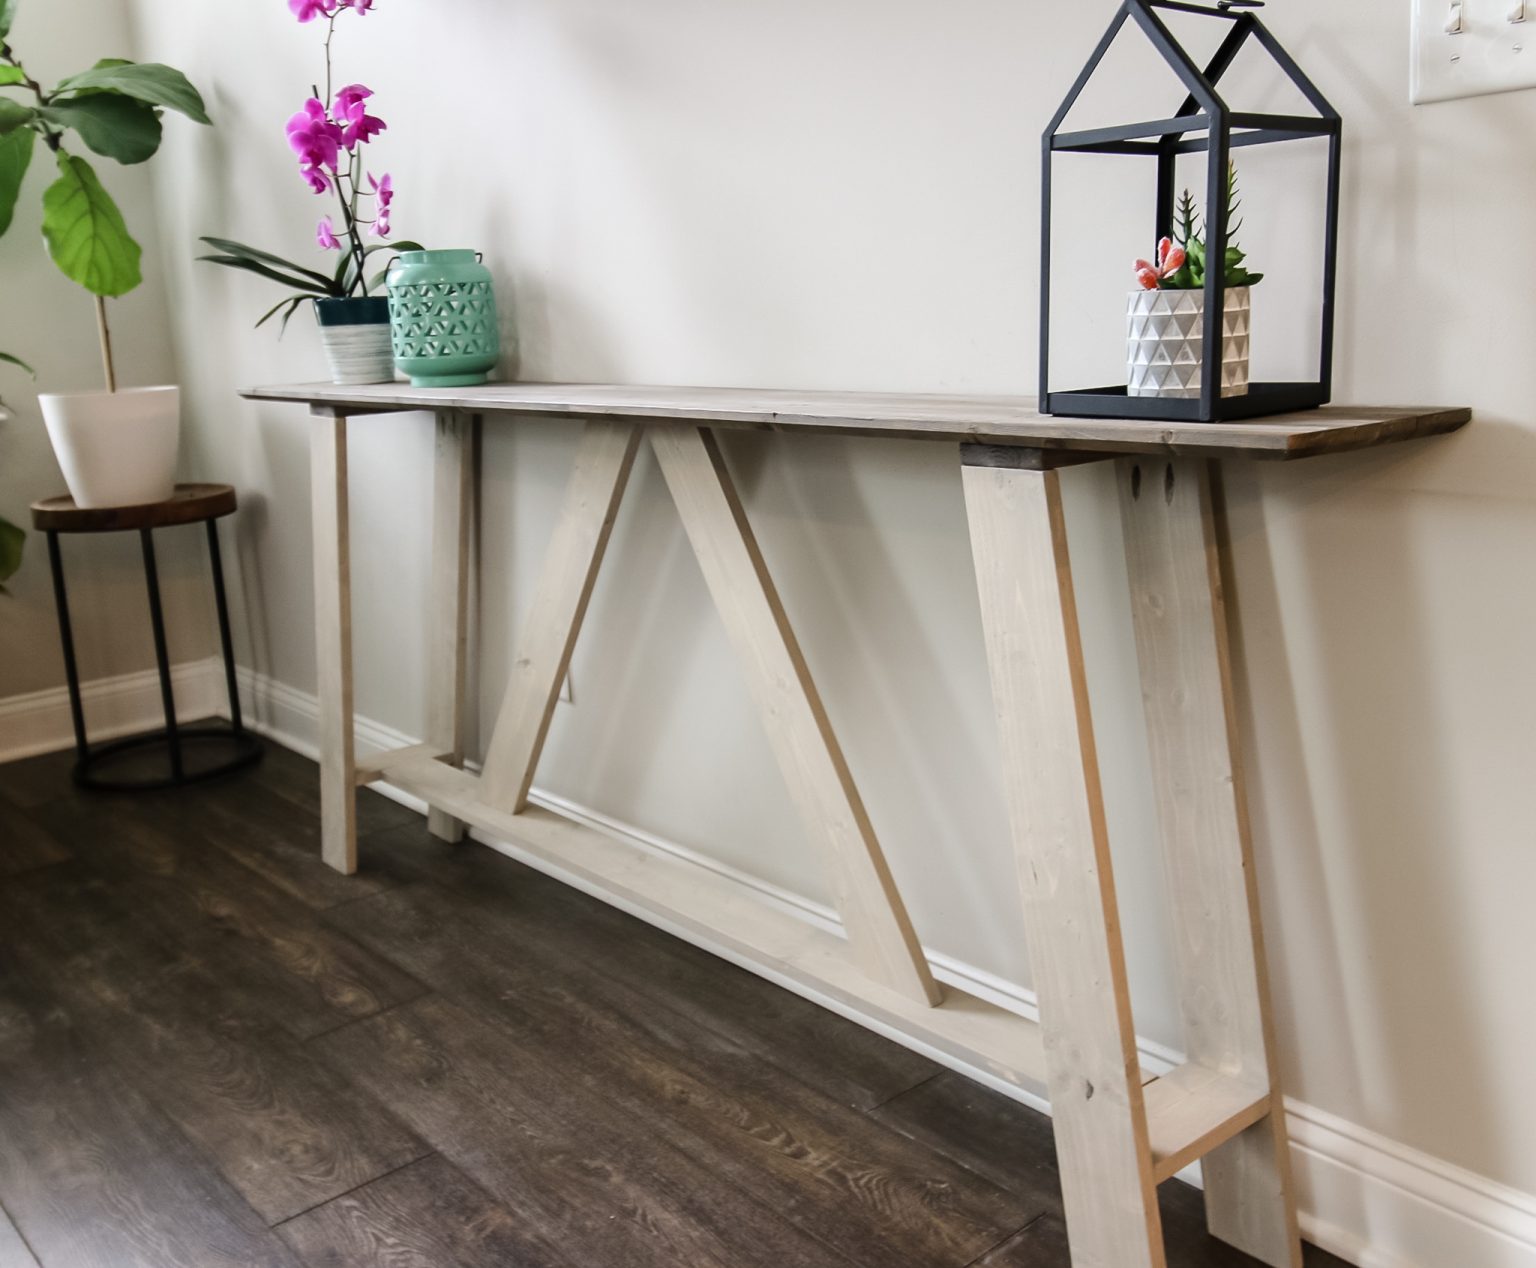 diy console table from kitchen cabinets